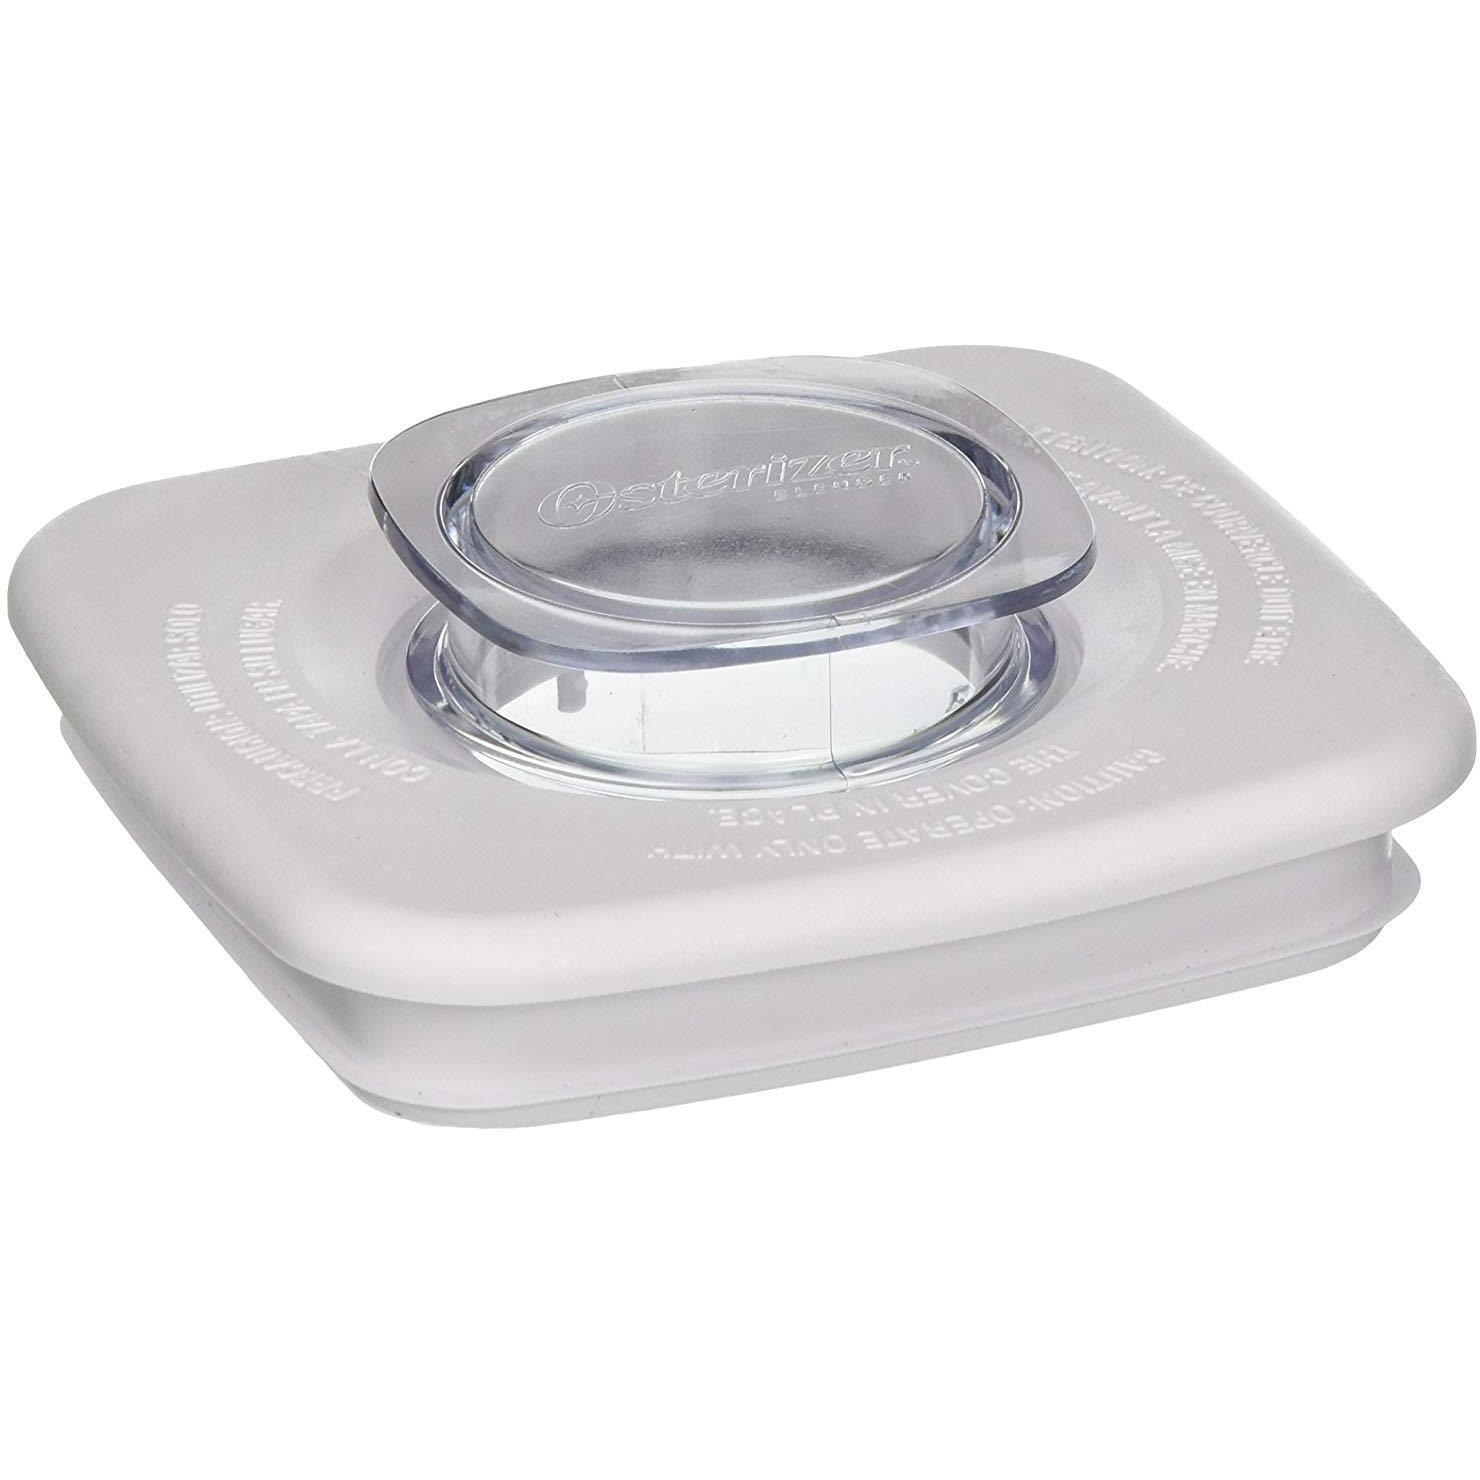 Oster 4903 White Jar Lid and Center Cap for Oster and Osterizer Blenders